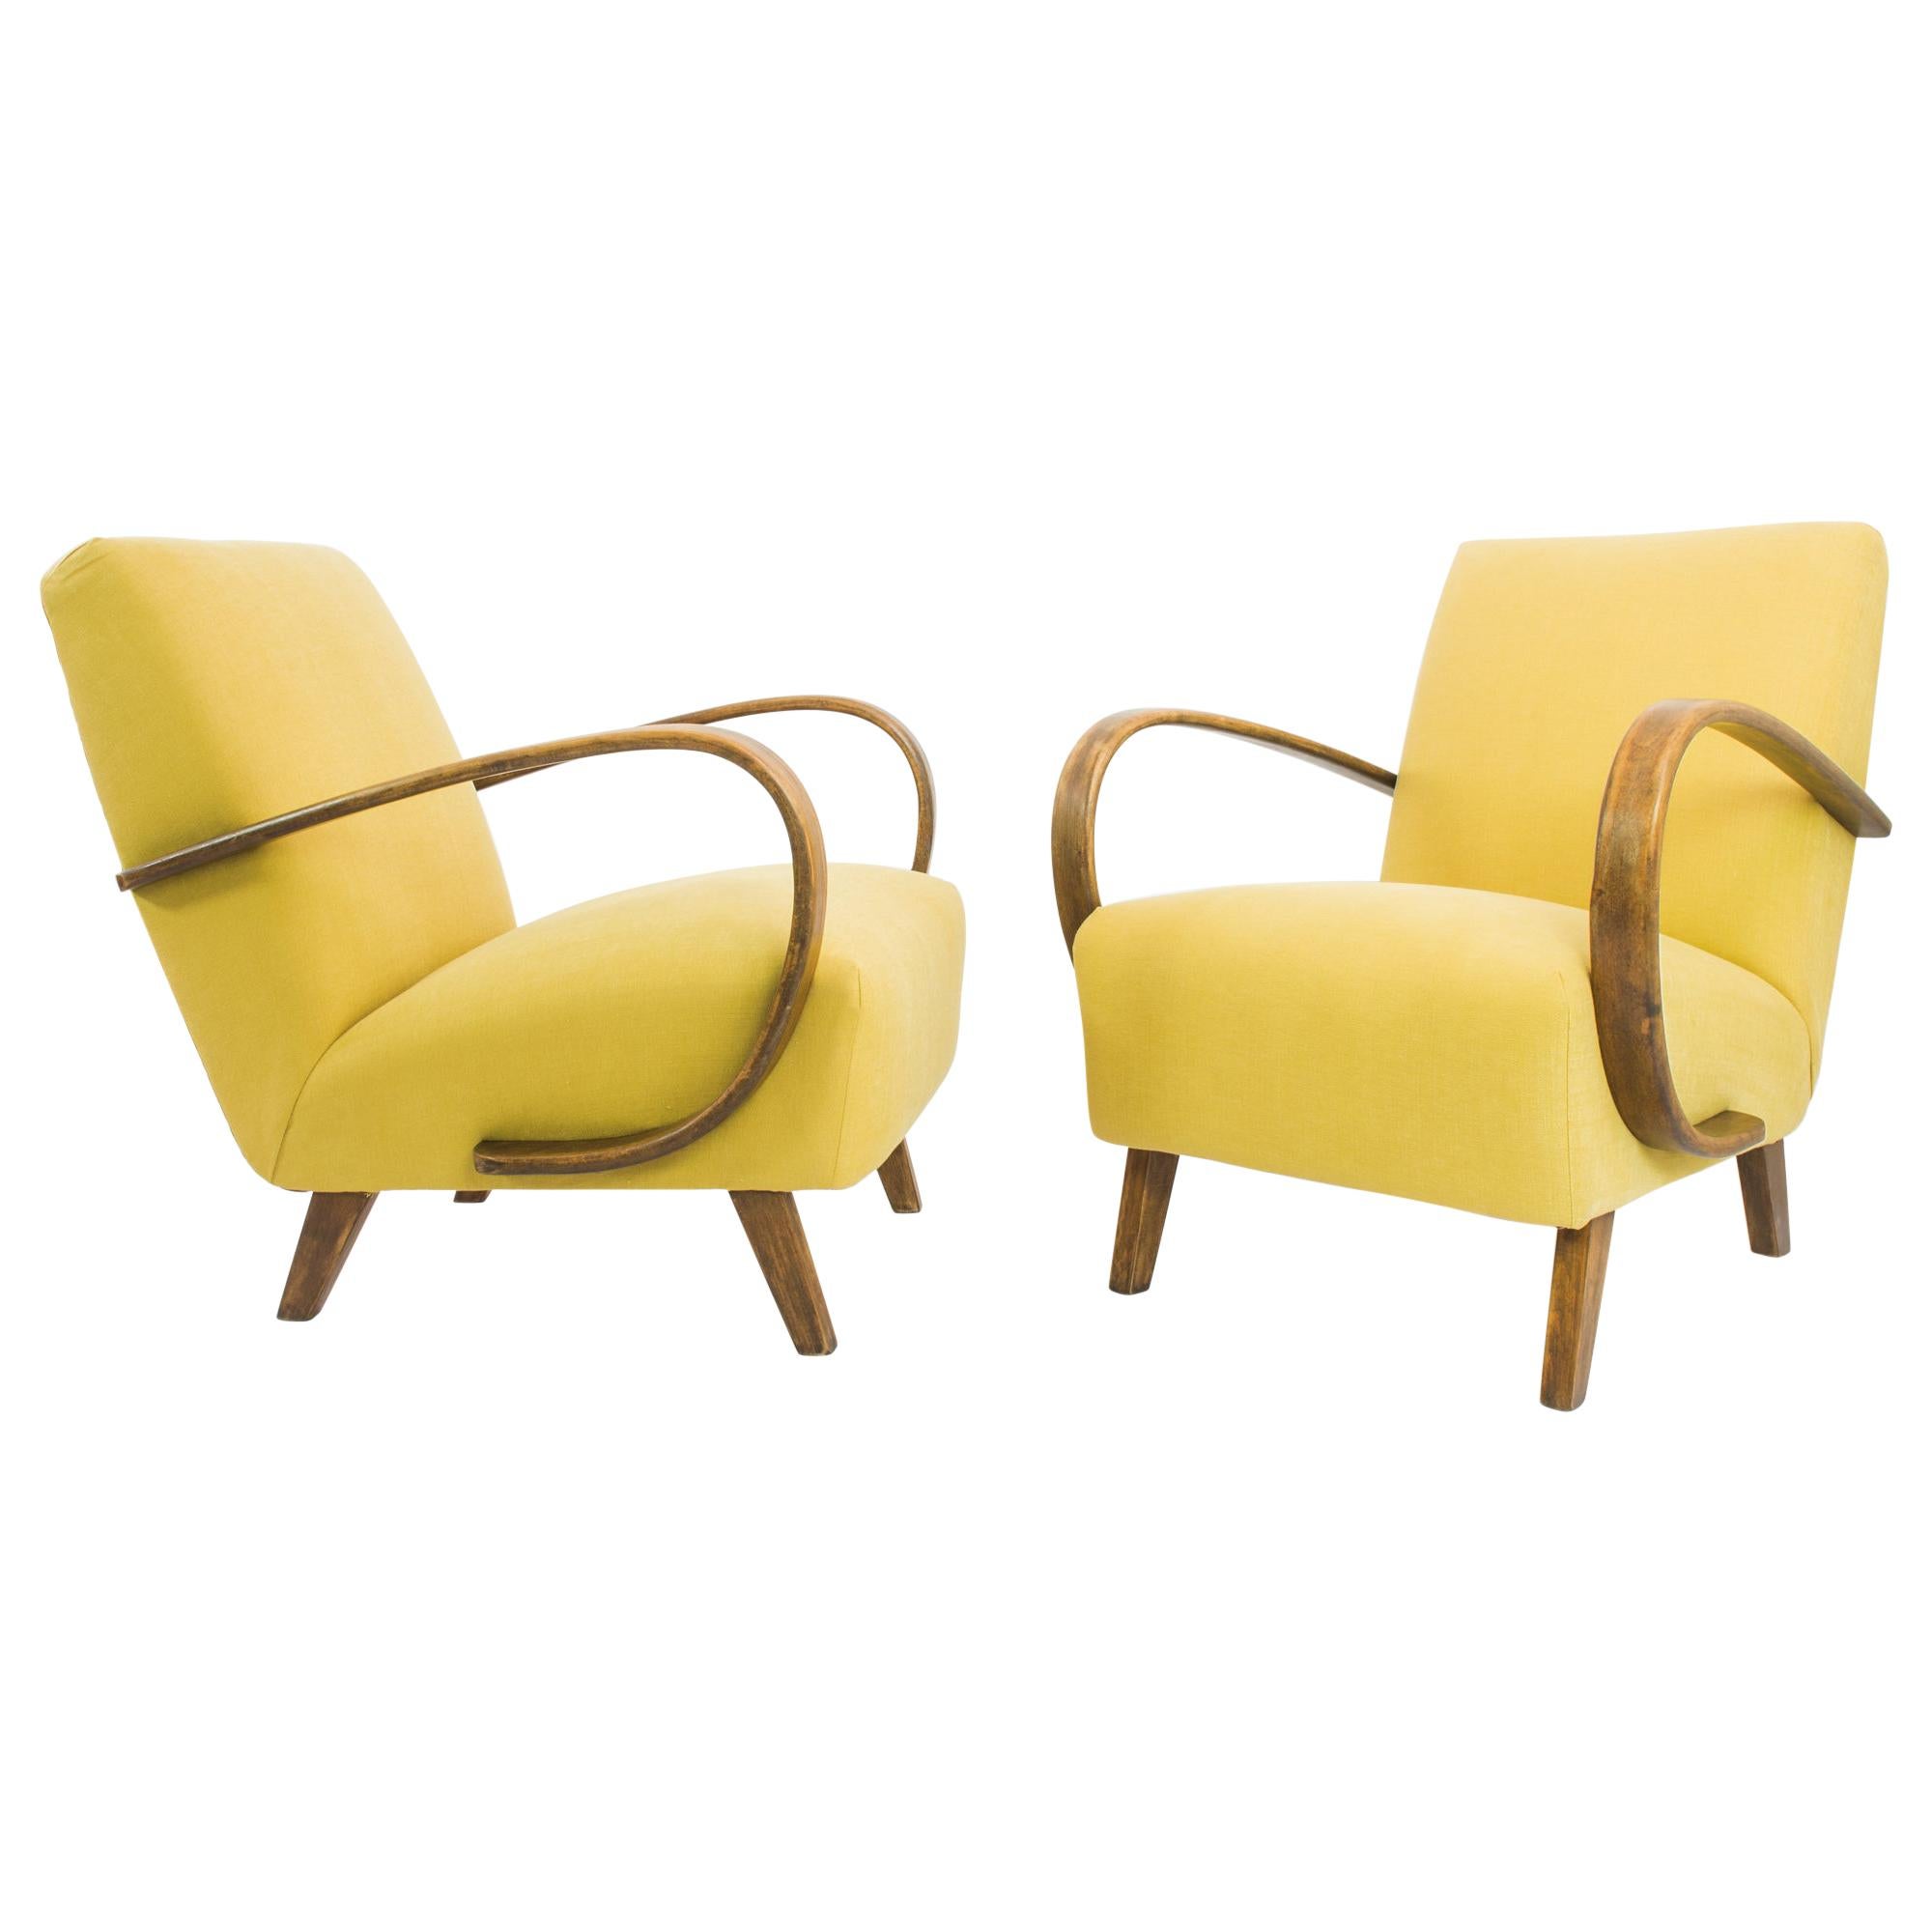 1960s Yellow Armchairs by J. Halabala, a Pair